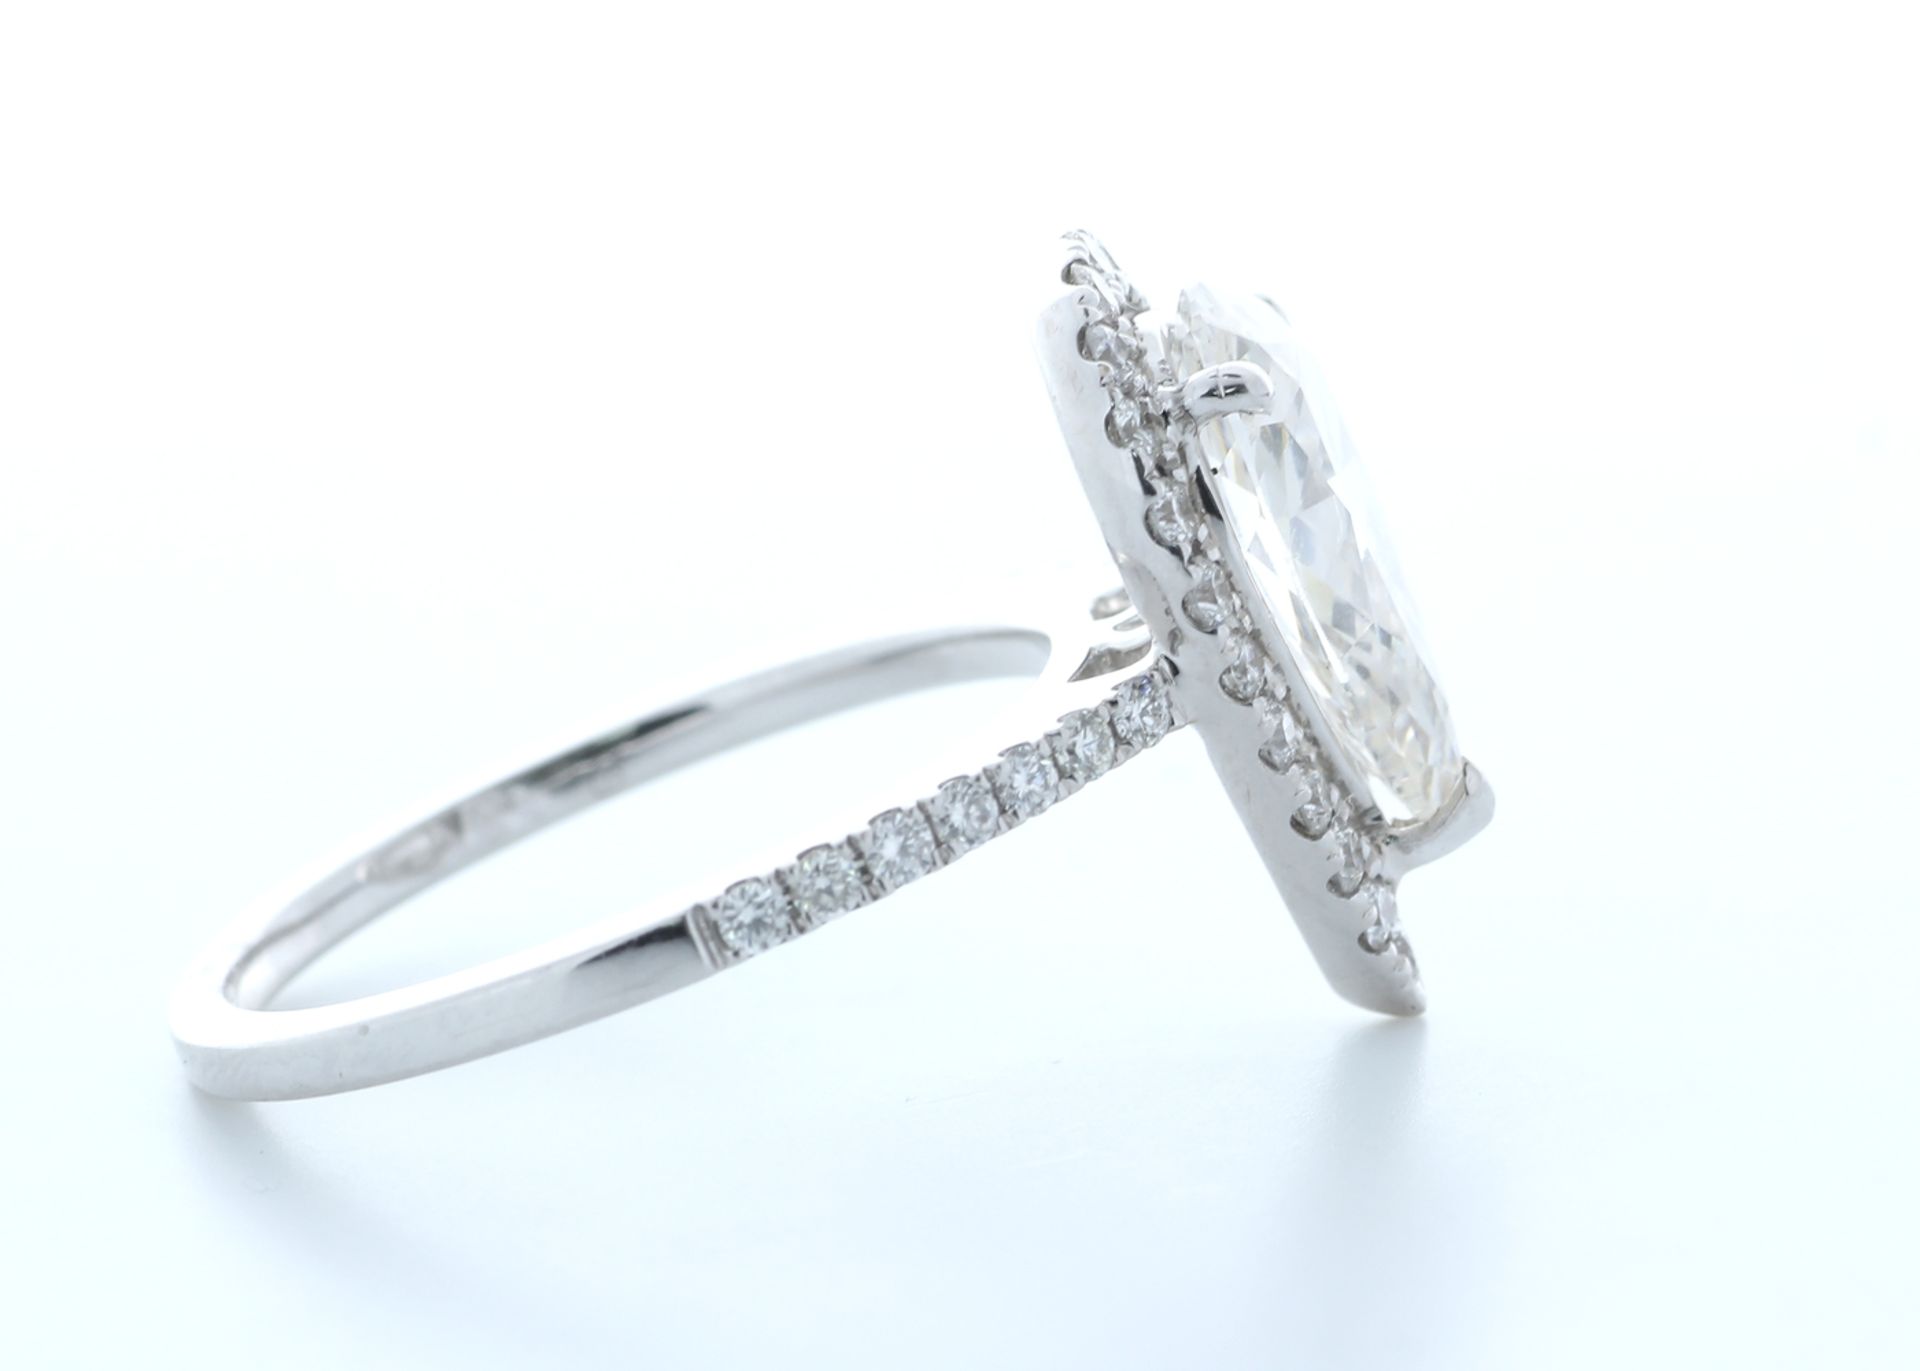 18ct White Gold Single Stone With Halo Setting Ring (2.04) 2.54 Carats - Valued by IDI £48,000. - Image 4 of 5